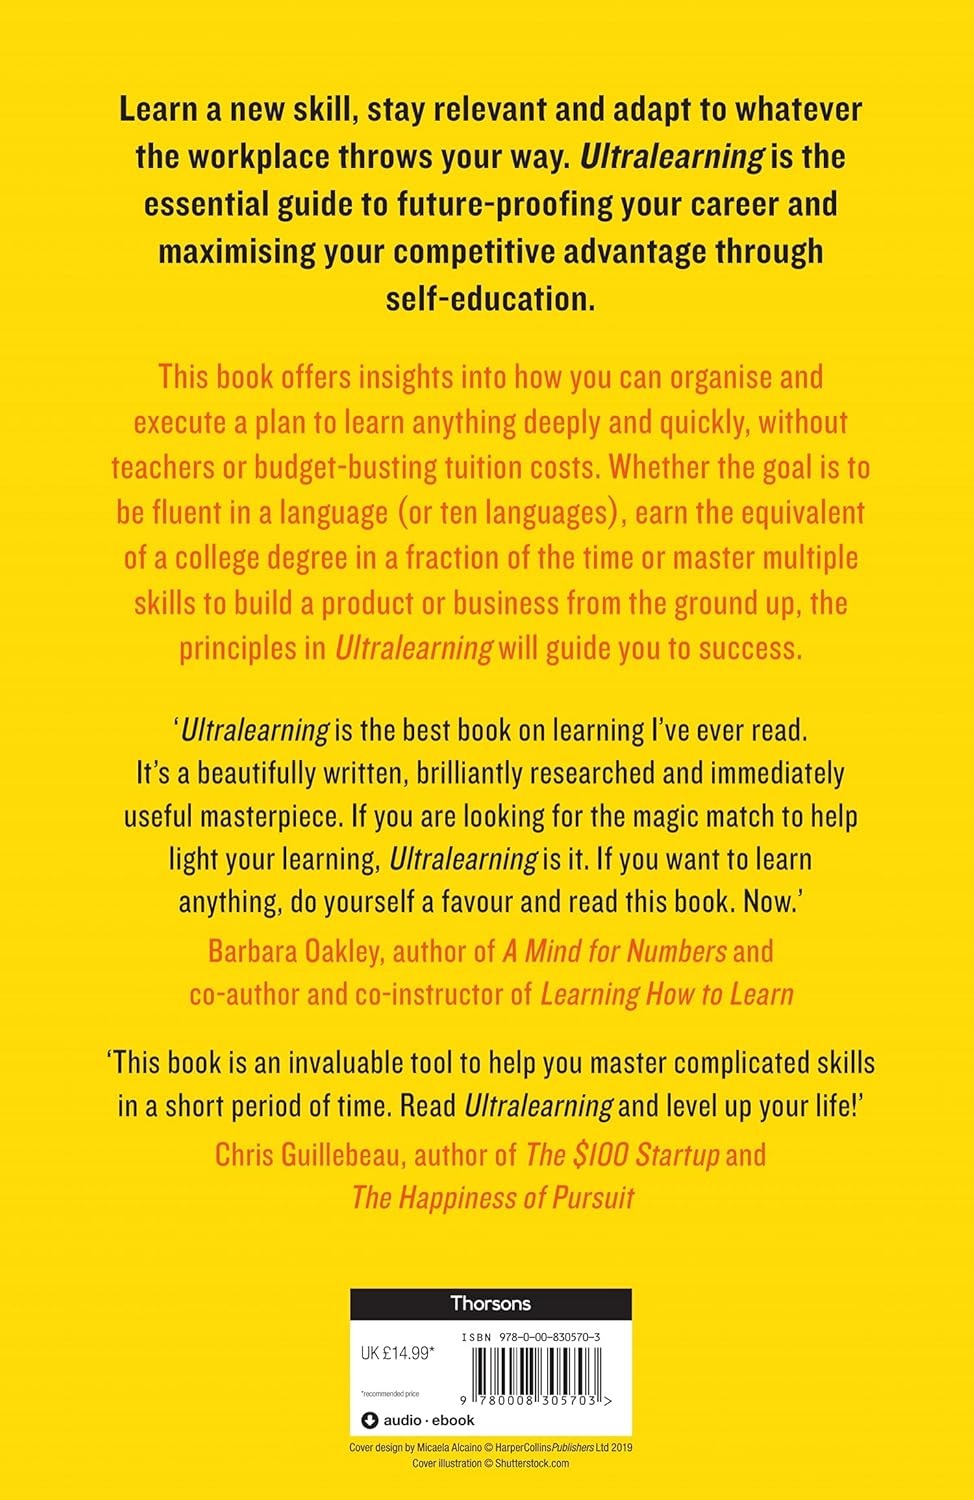 Ultralearning by Scott H. Young (Author)